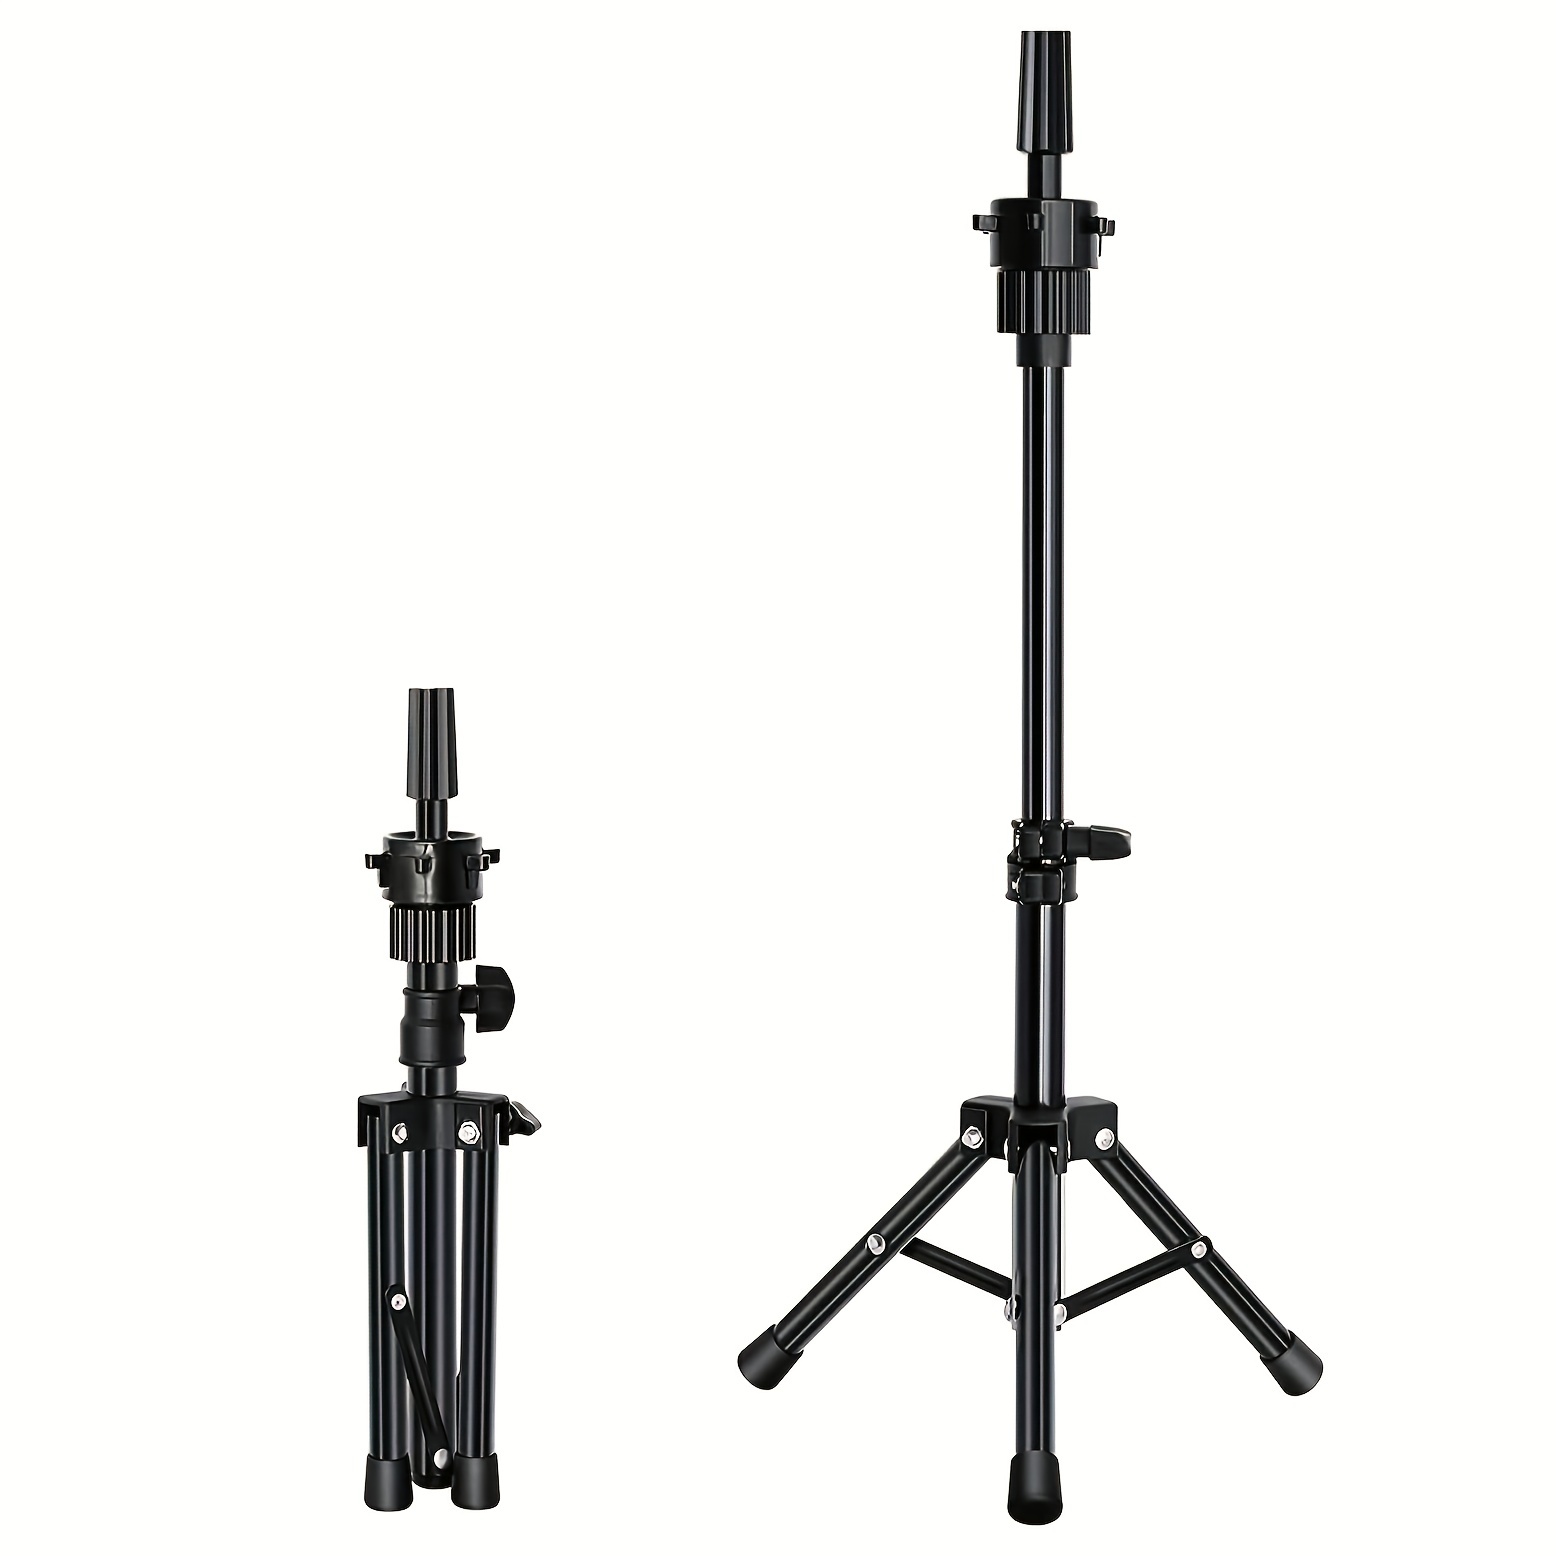 Wig Stand Adjustable Tripod for Mannequin Training Head Wigs